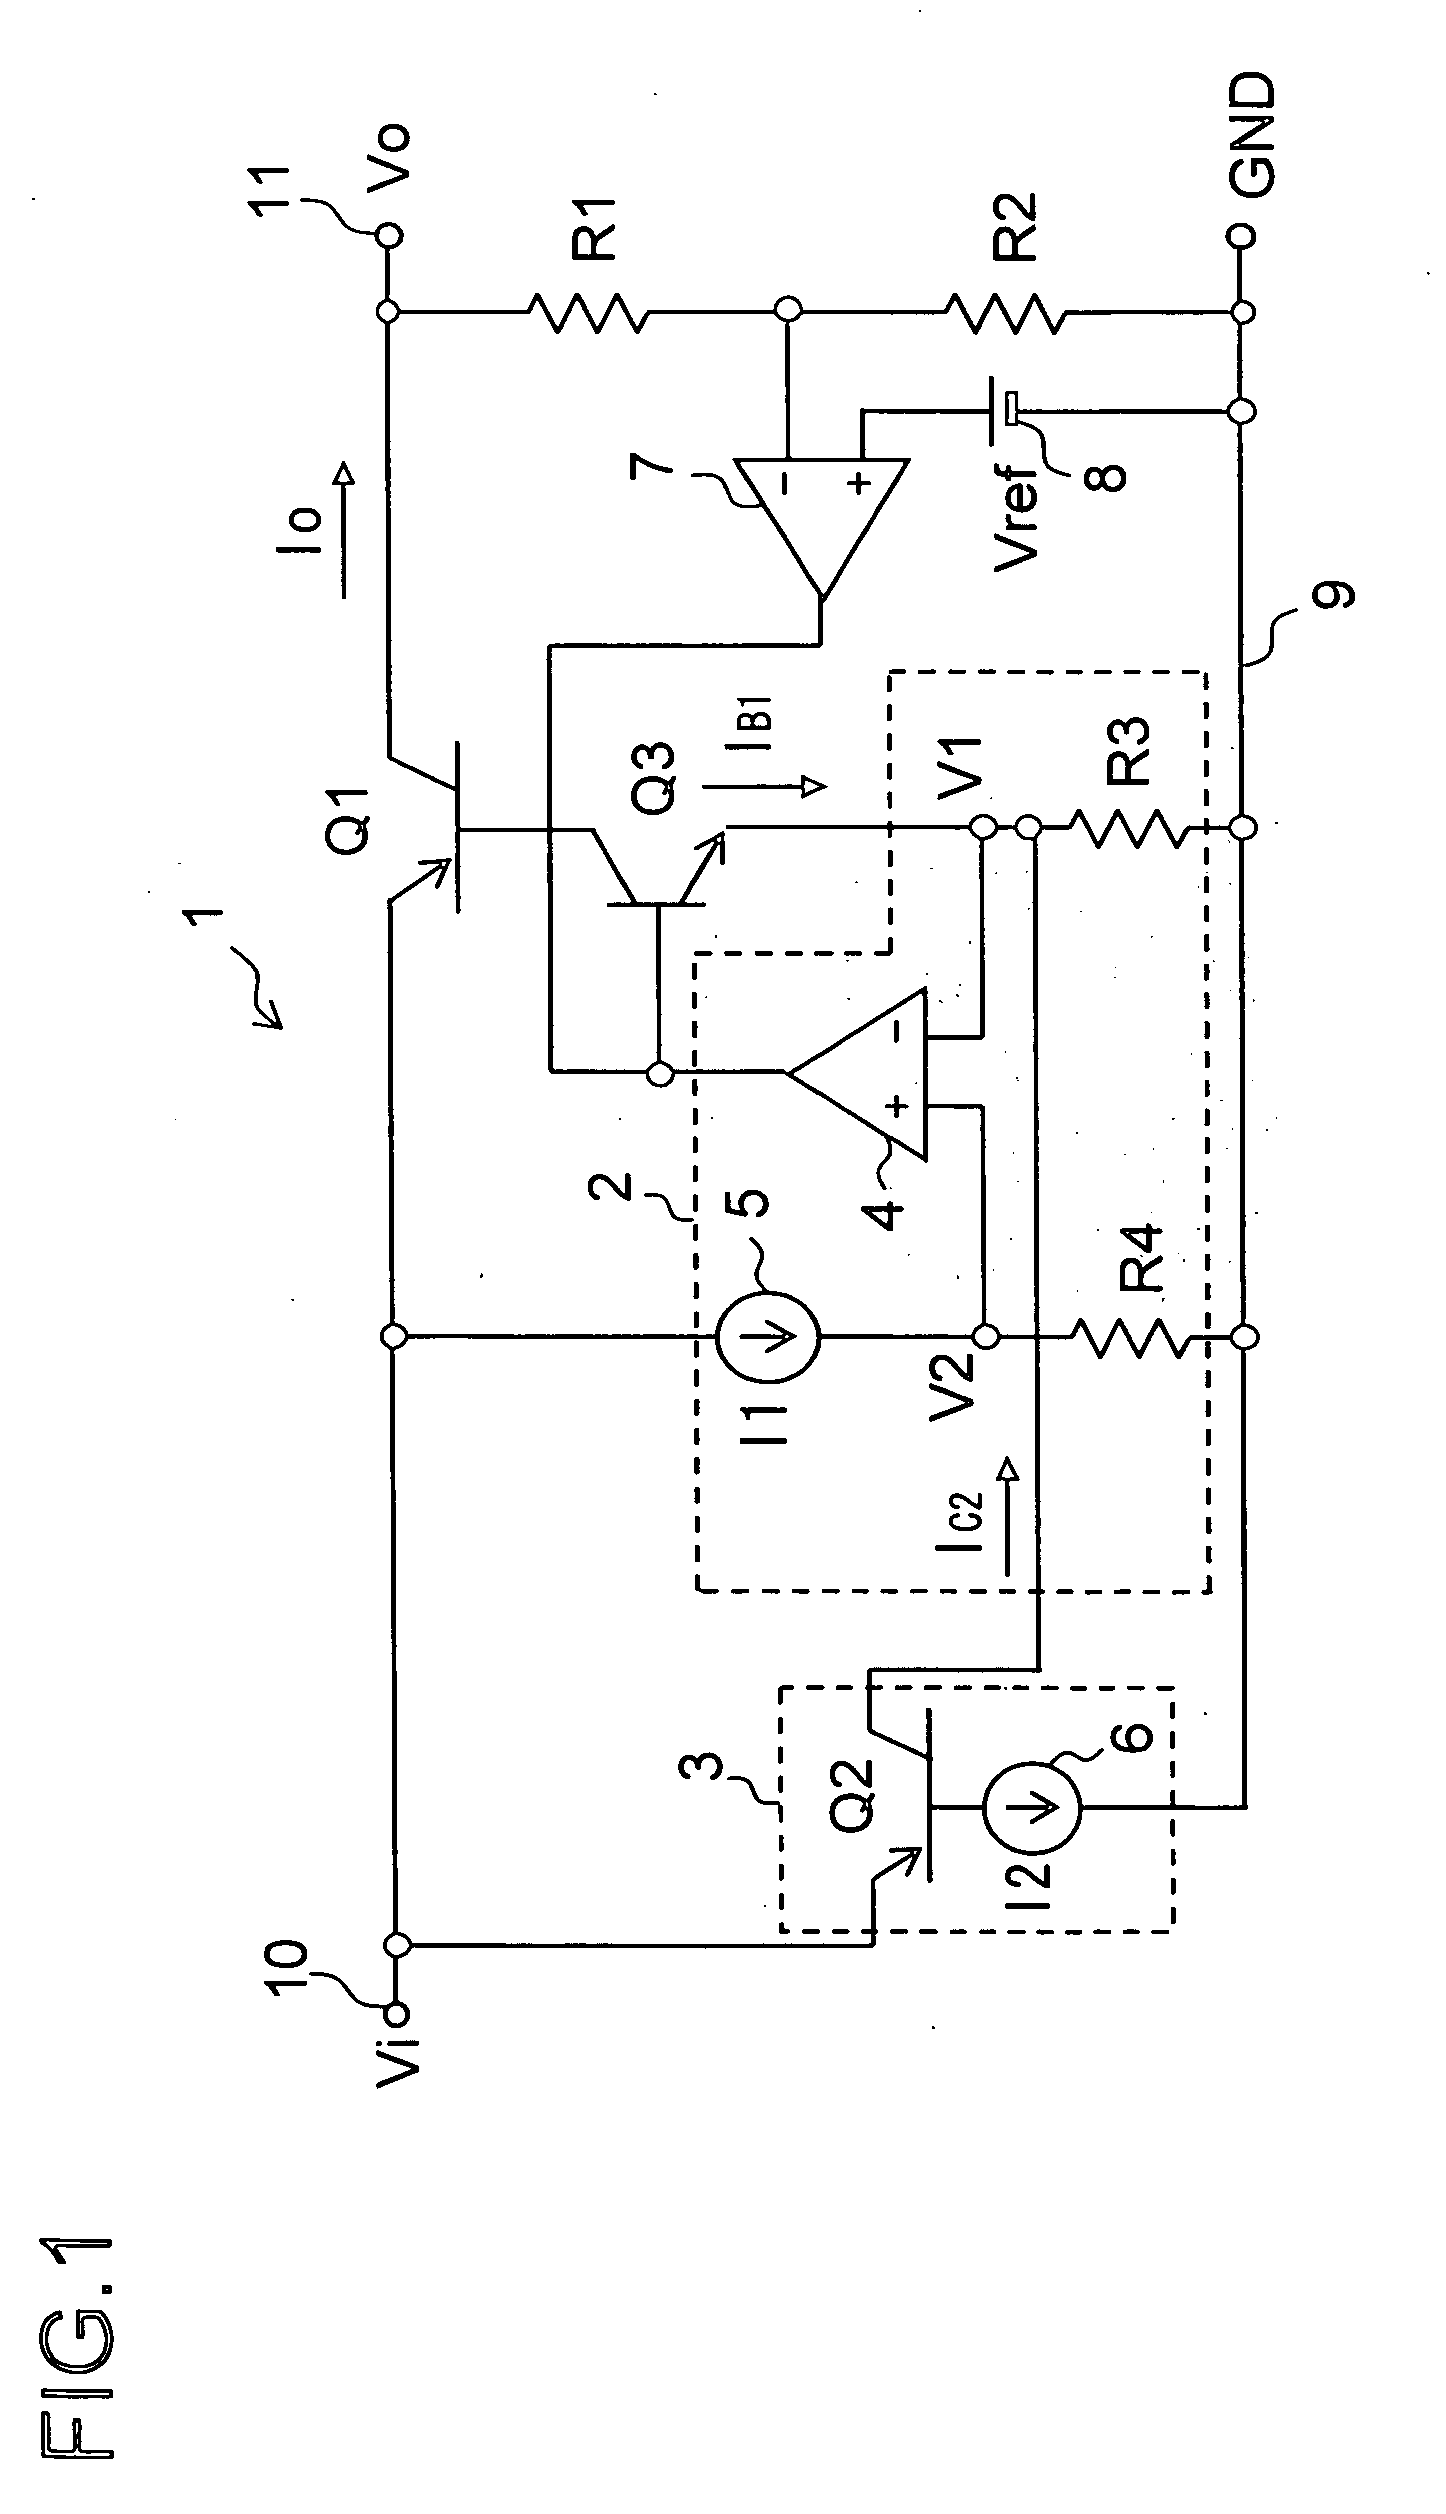 Stabilized DC power supply circuit